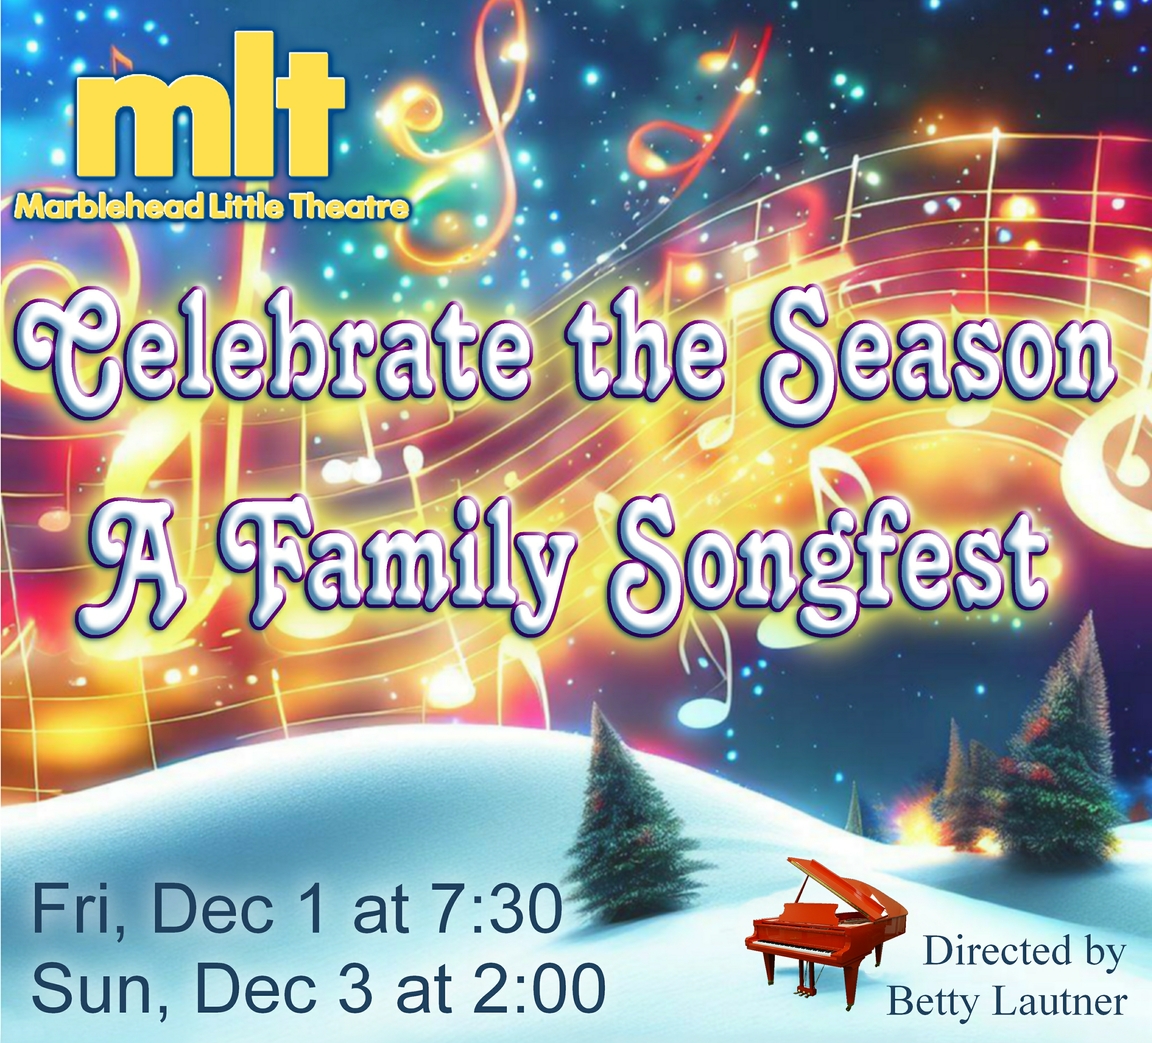 Celebrate the season a family songfest.